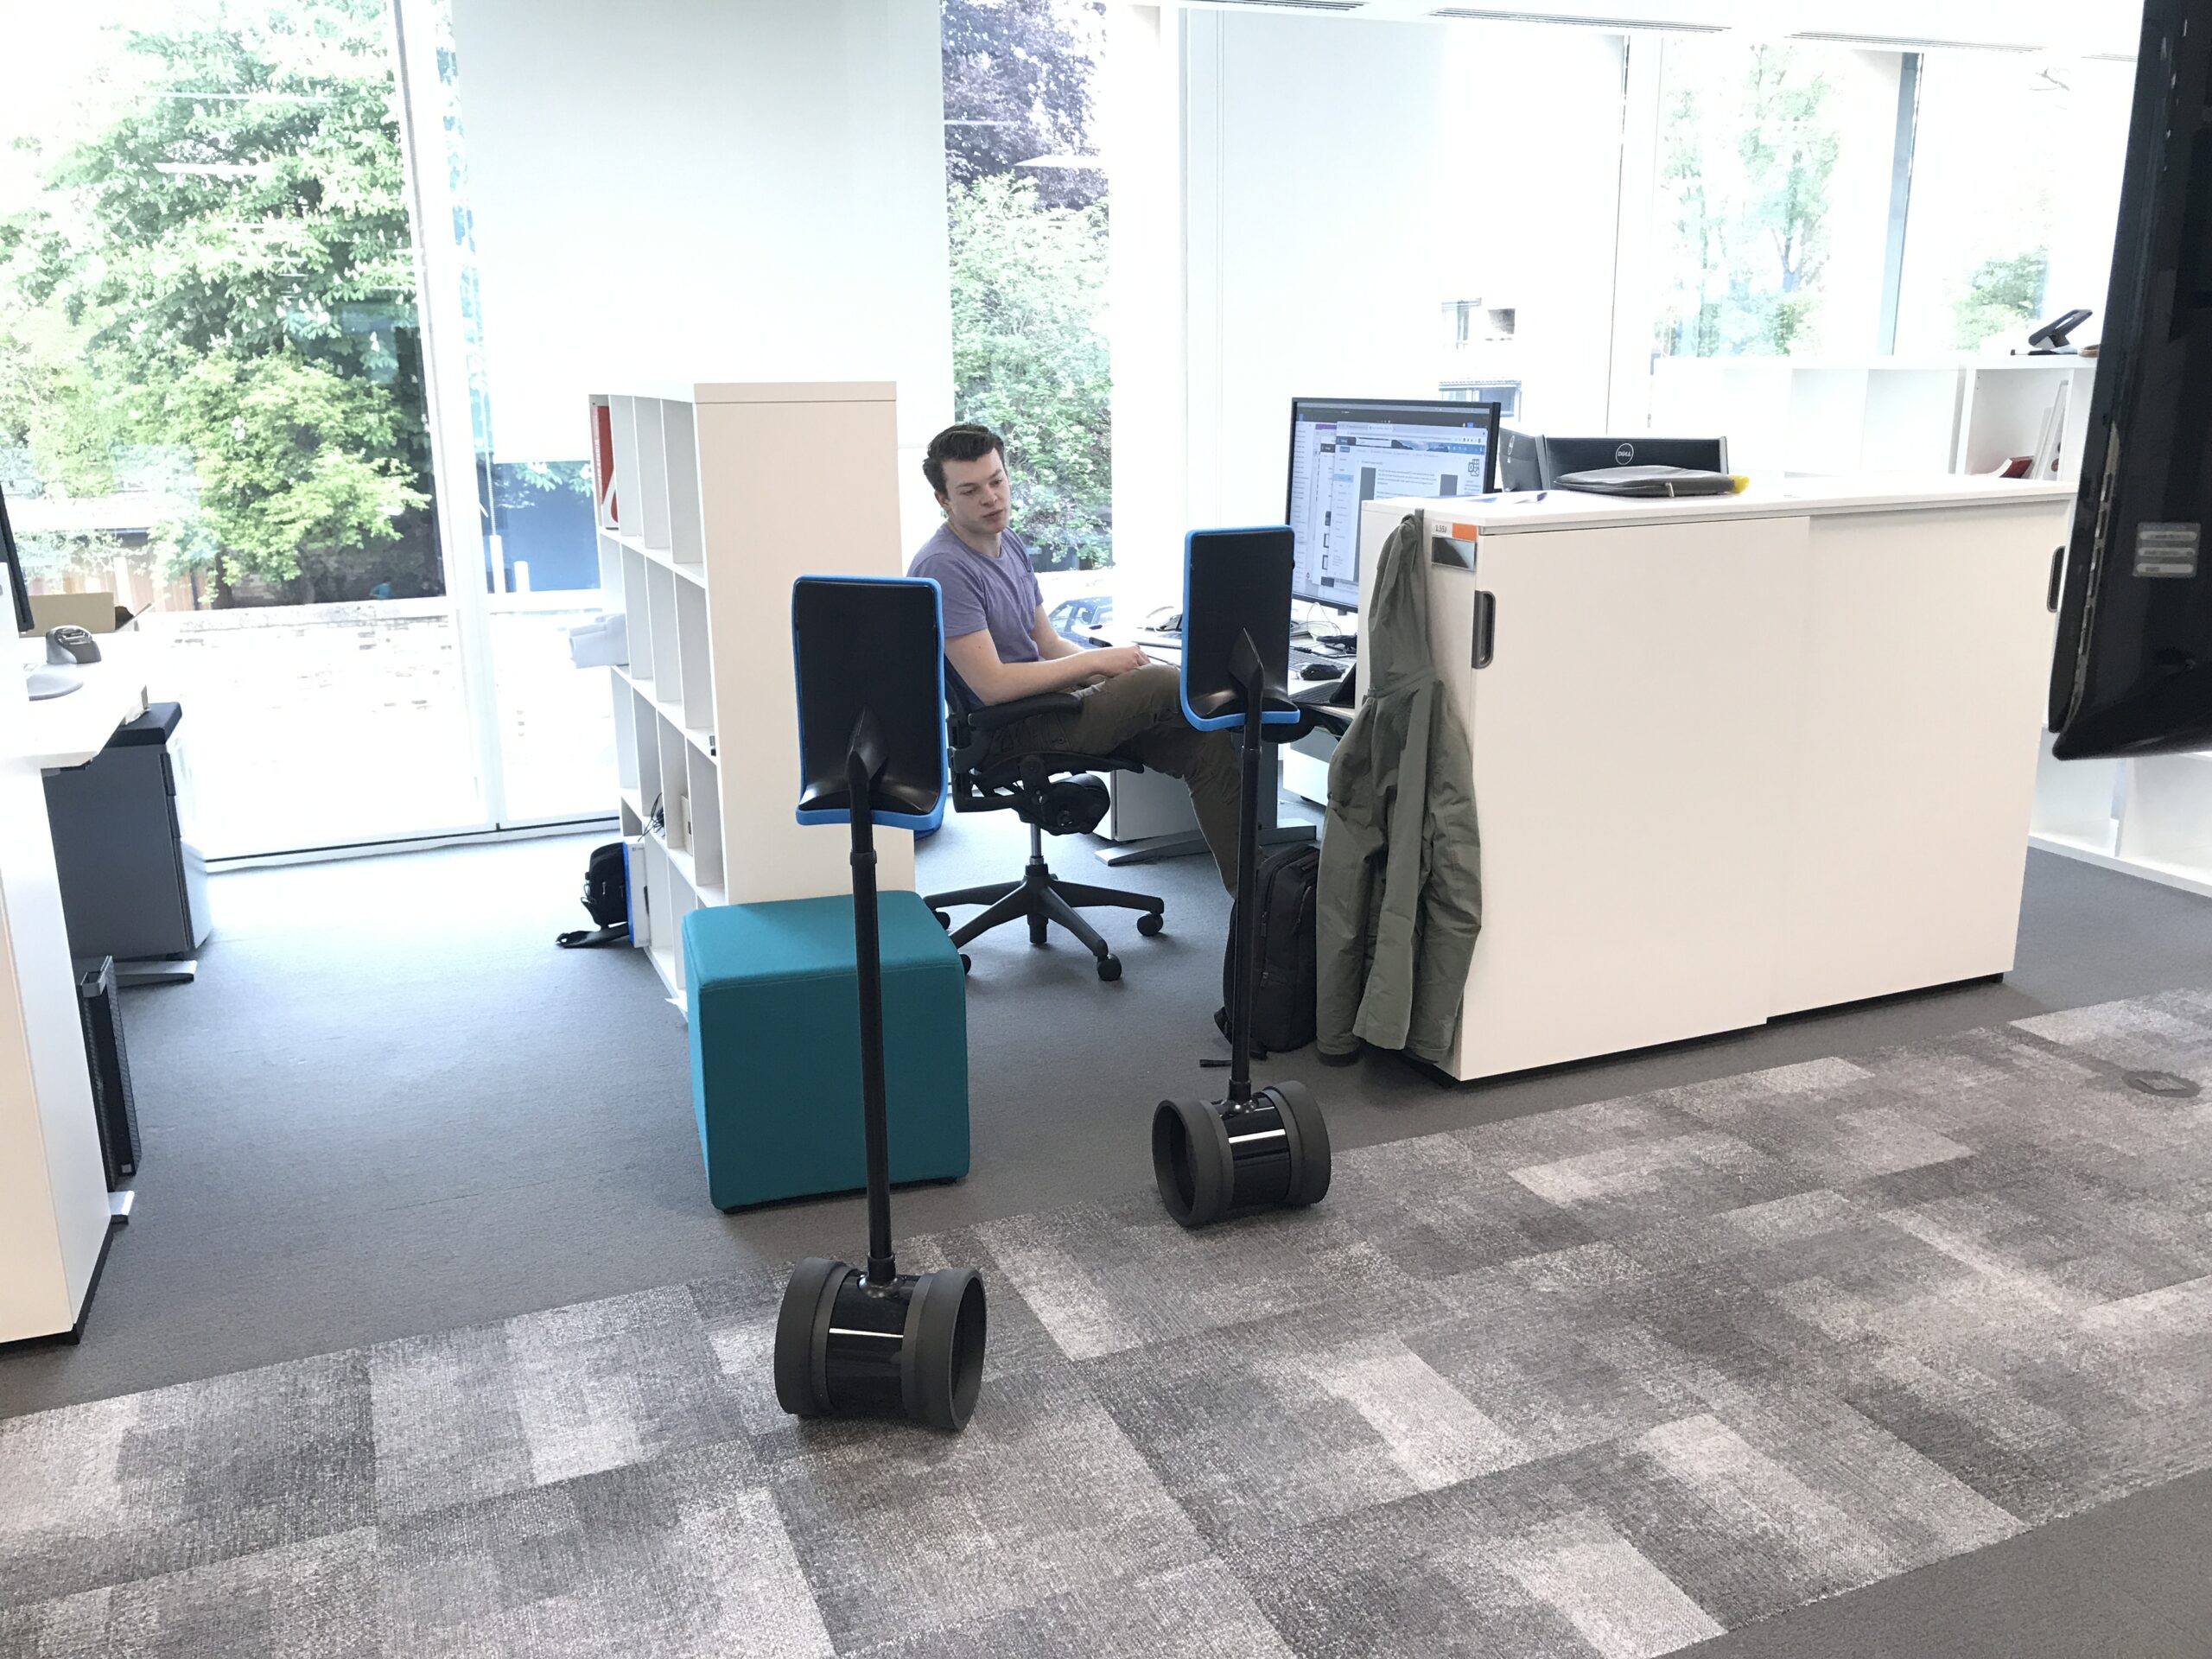 A man talks to people in two telepresence robots in an office